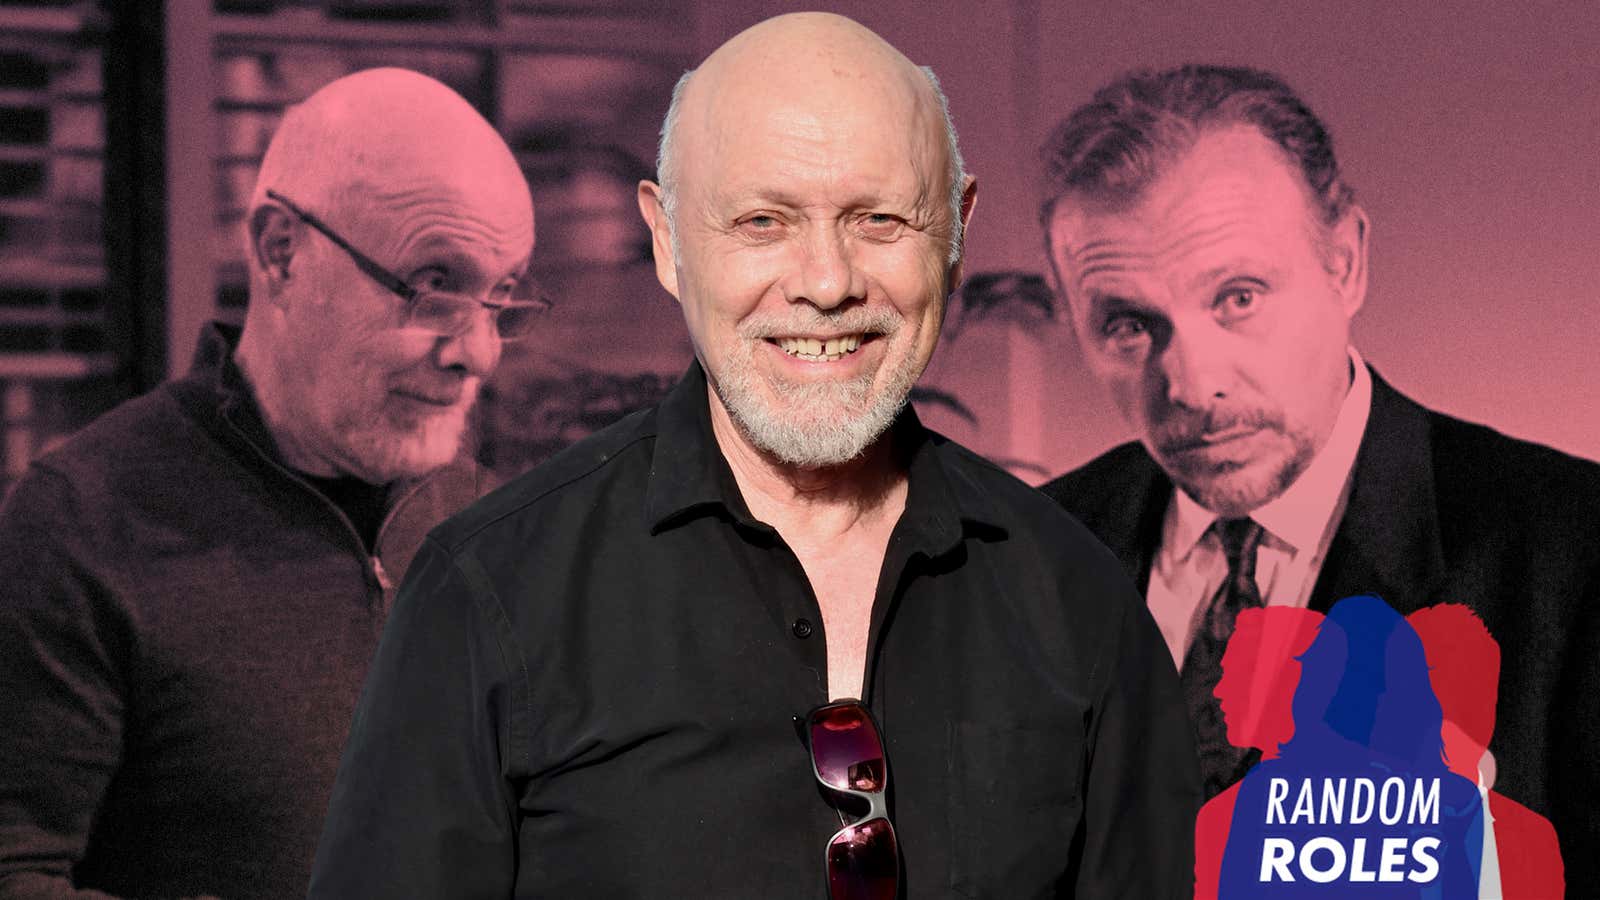 From left: Hector Elizondo on Last Man Standing (Photo: Elisabeth Caren/Fox), at the Television Critics Association press tour in 2019 (Photo: Alberto E. Rodriguez/Getty Images), and in Pretty Woman (Screenshot)